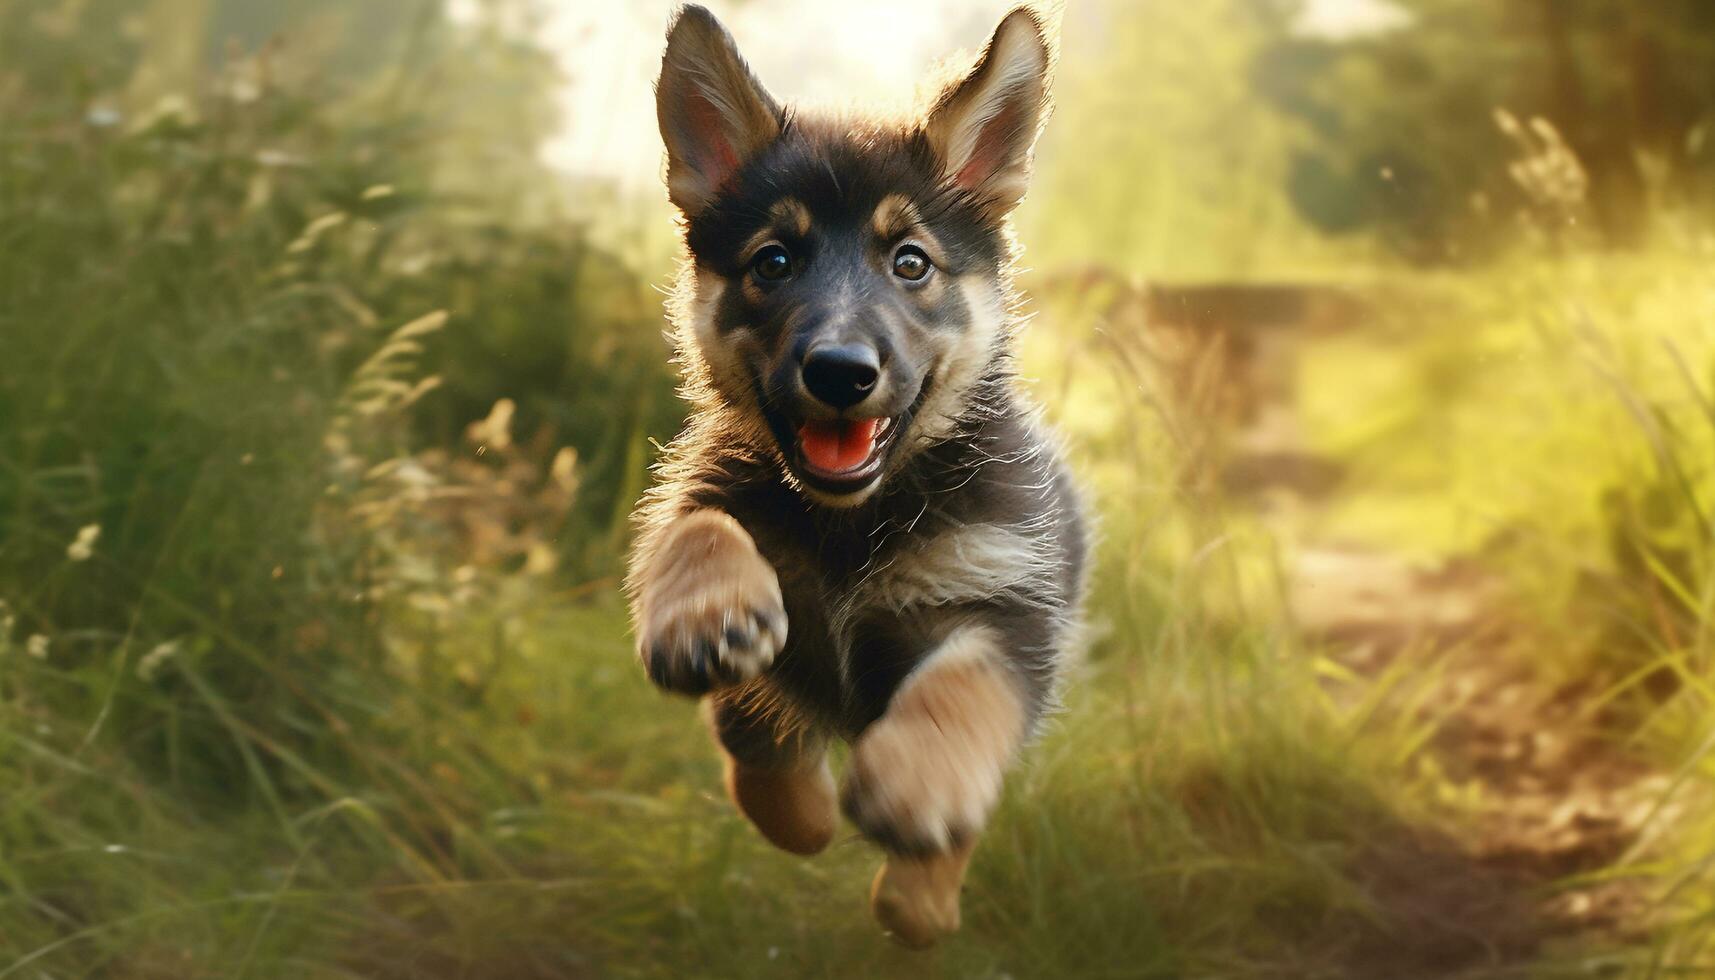 Cute puppy running outdoors, playing with friends in meadow generated by AI photo